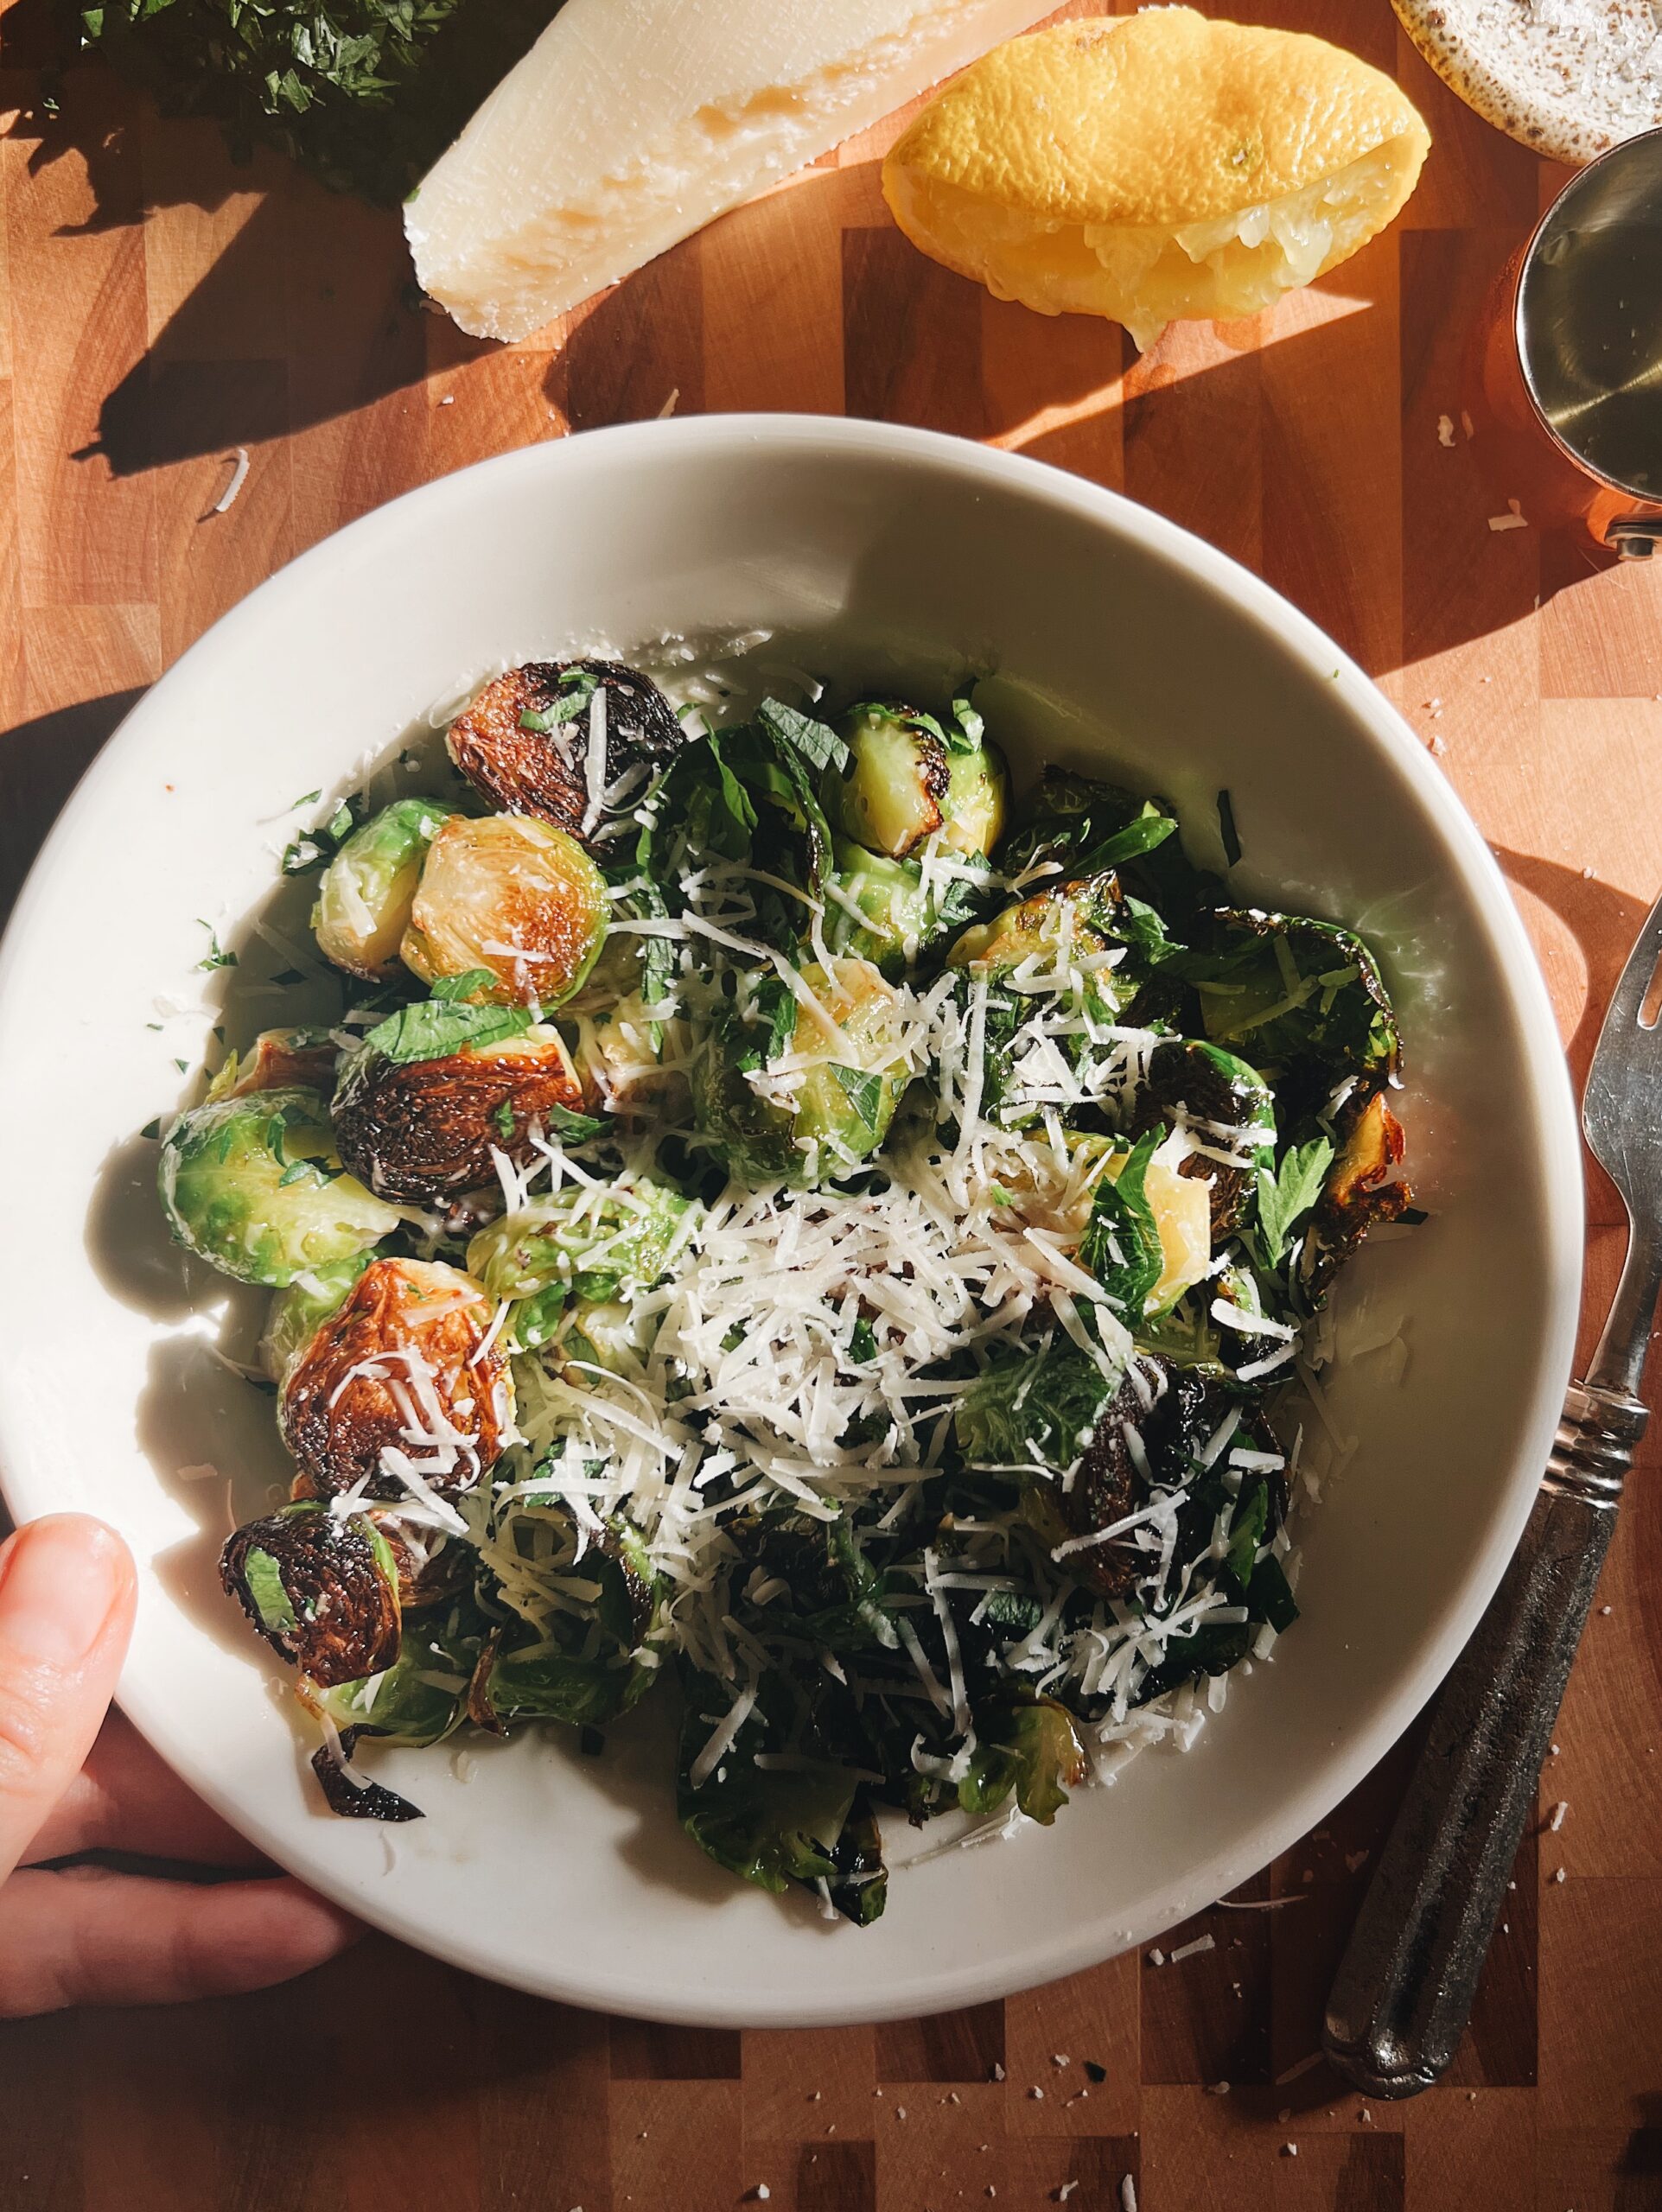 Here’s How To Make Restaurant-Quality Brussels Sprouts At Home